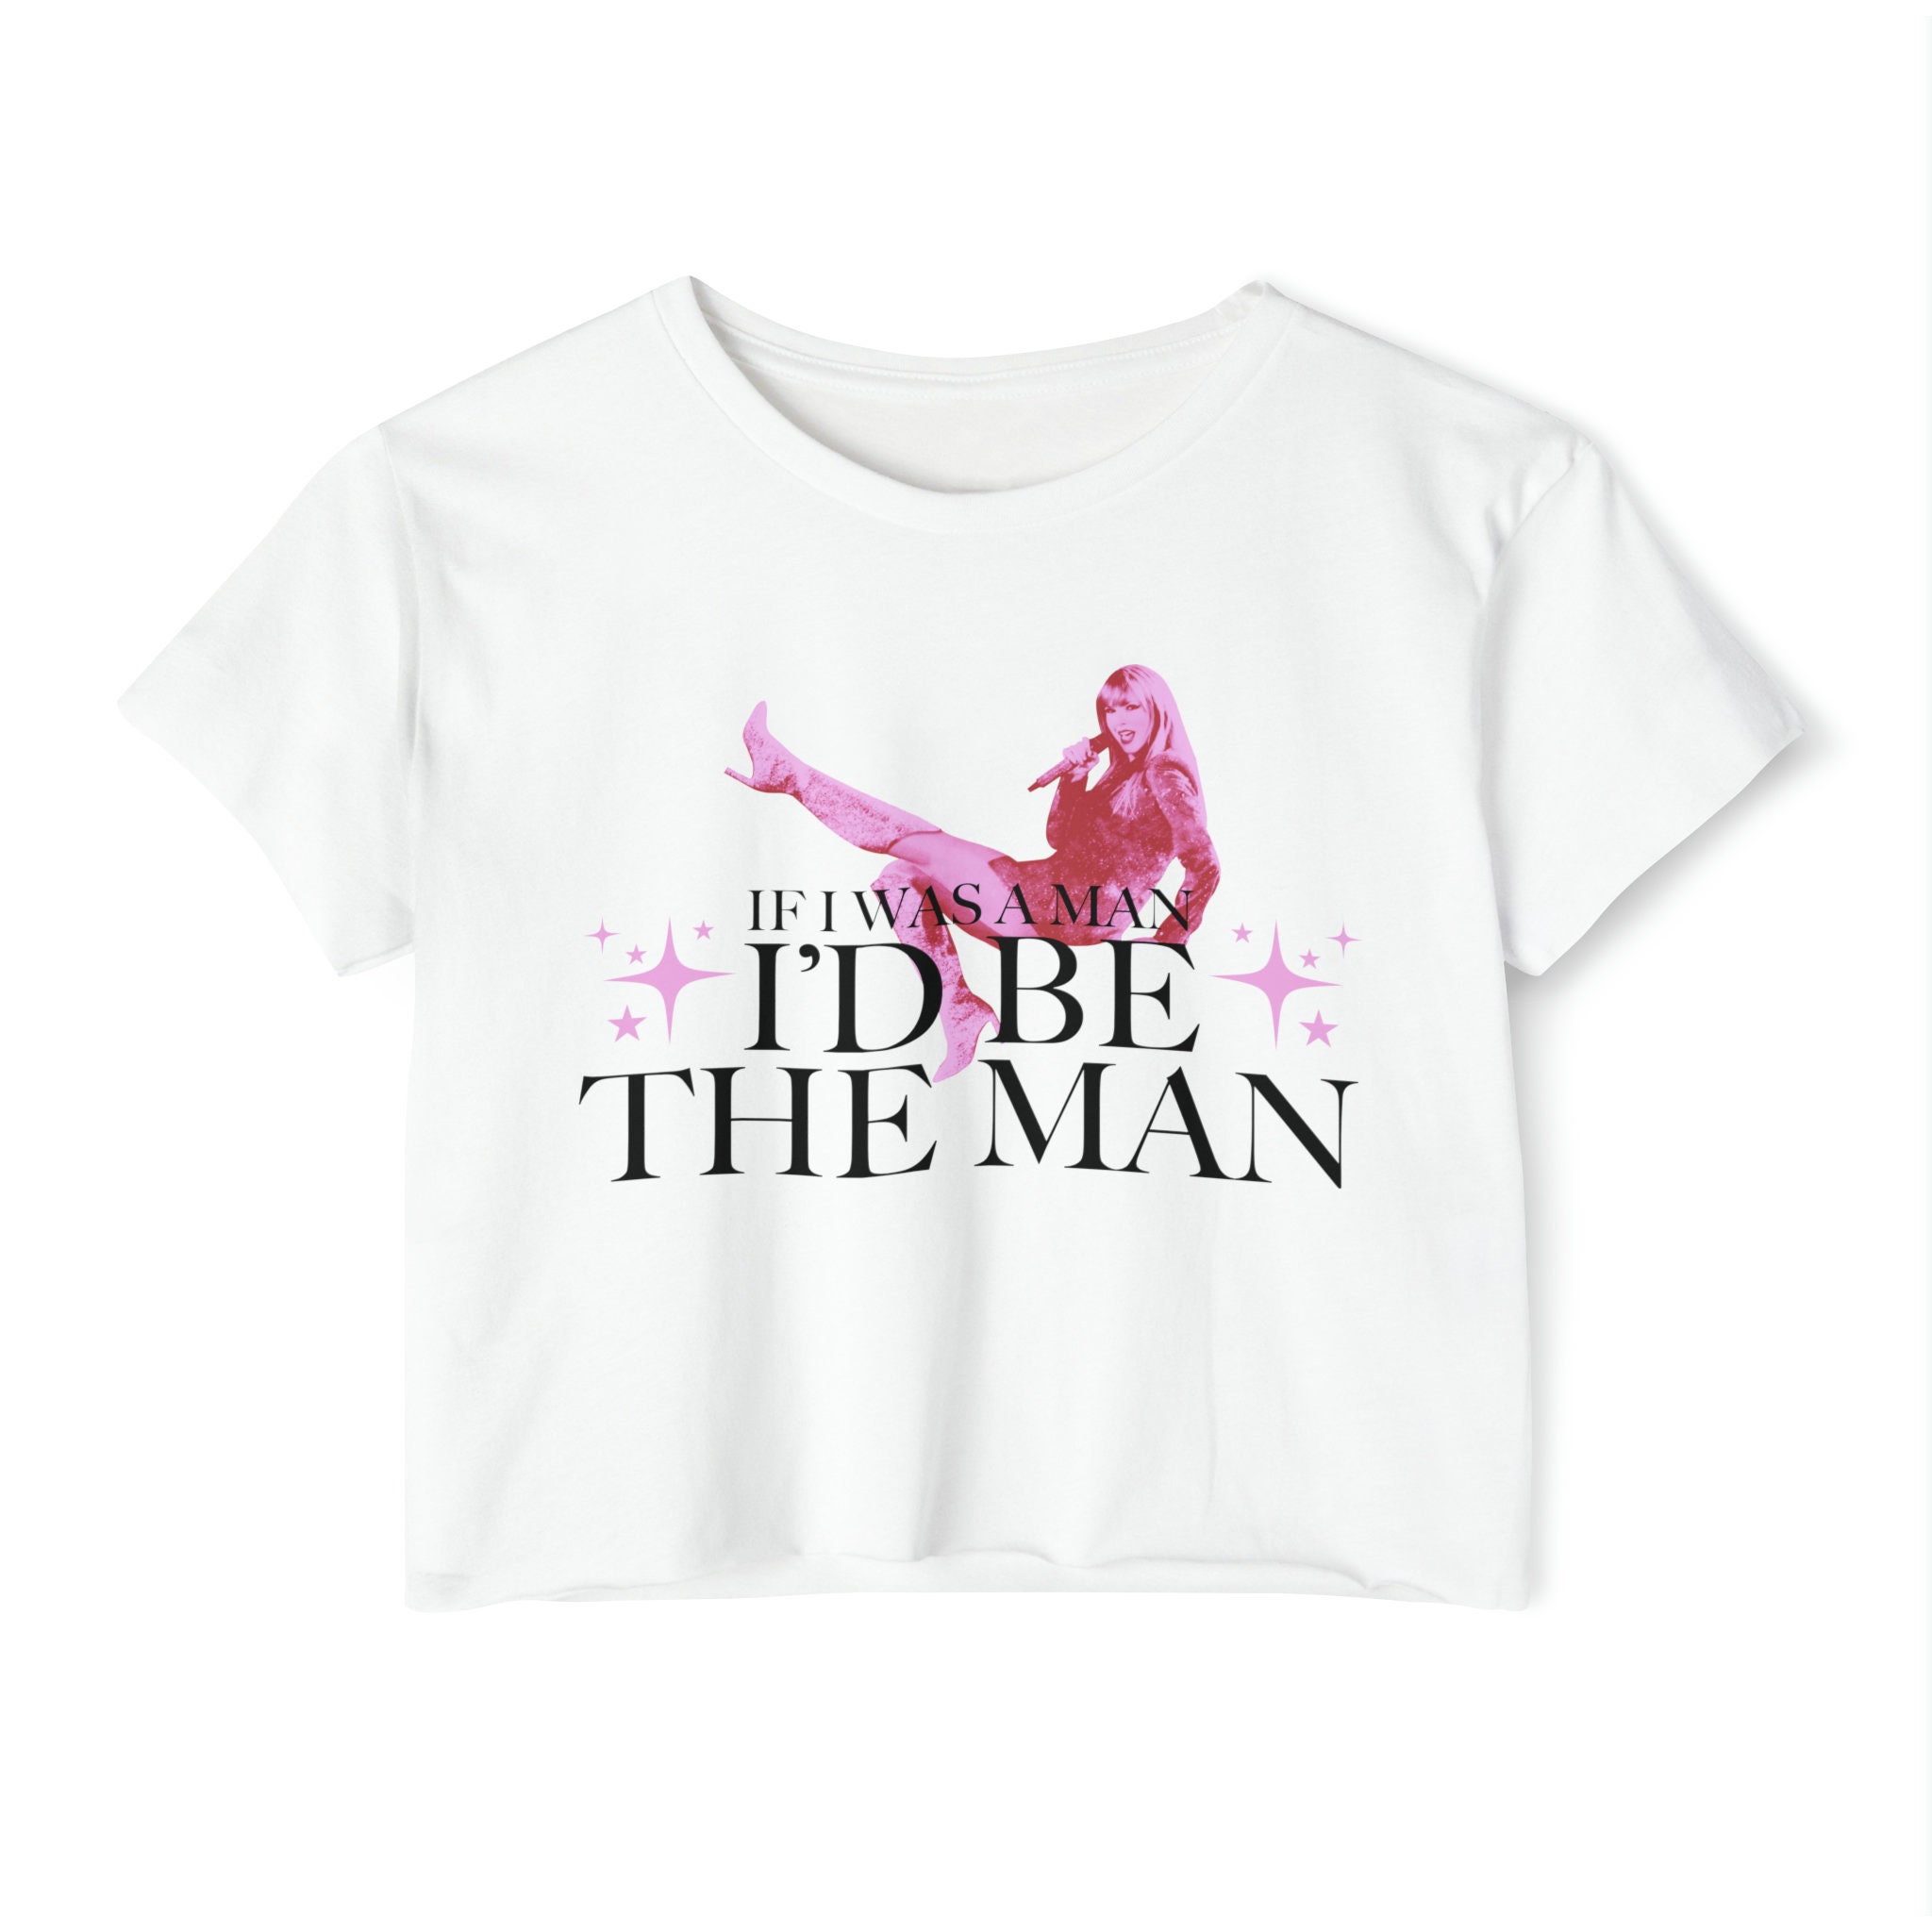 The Man Taylor Crop Top Shirt, Taylor Flowy Cropped Tee